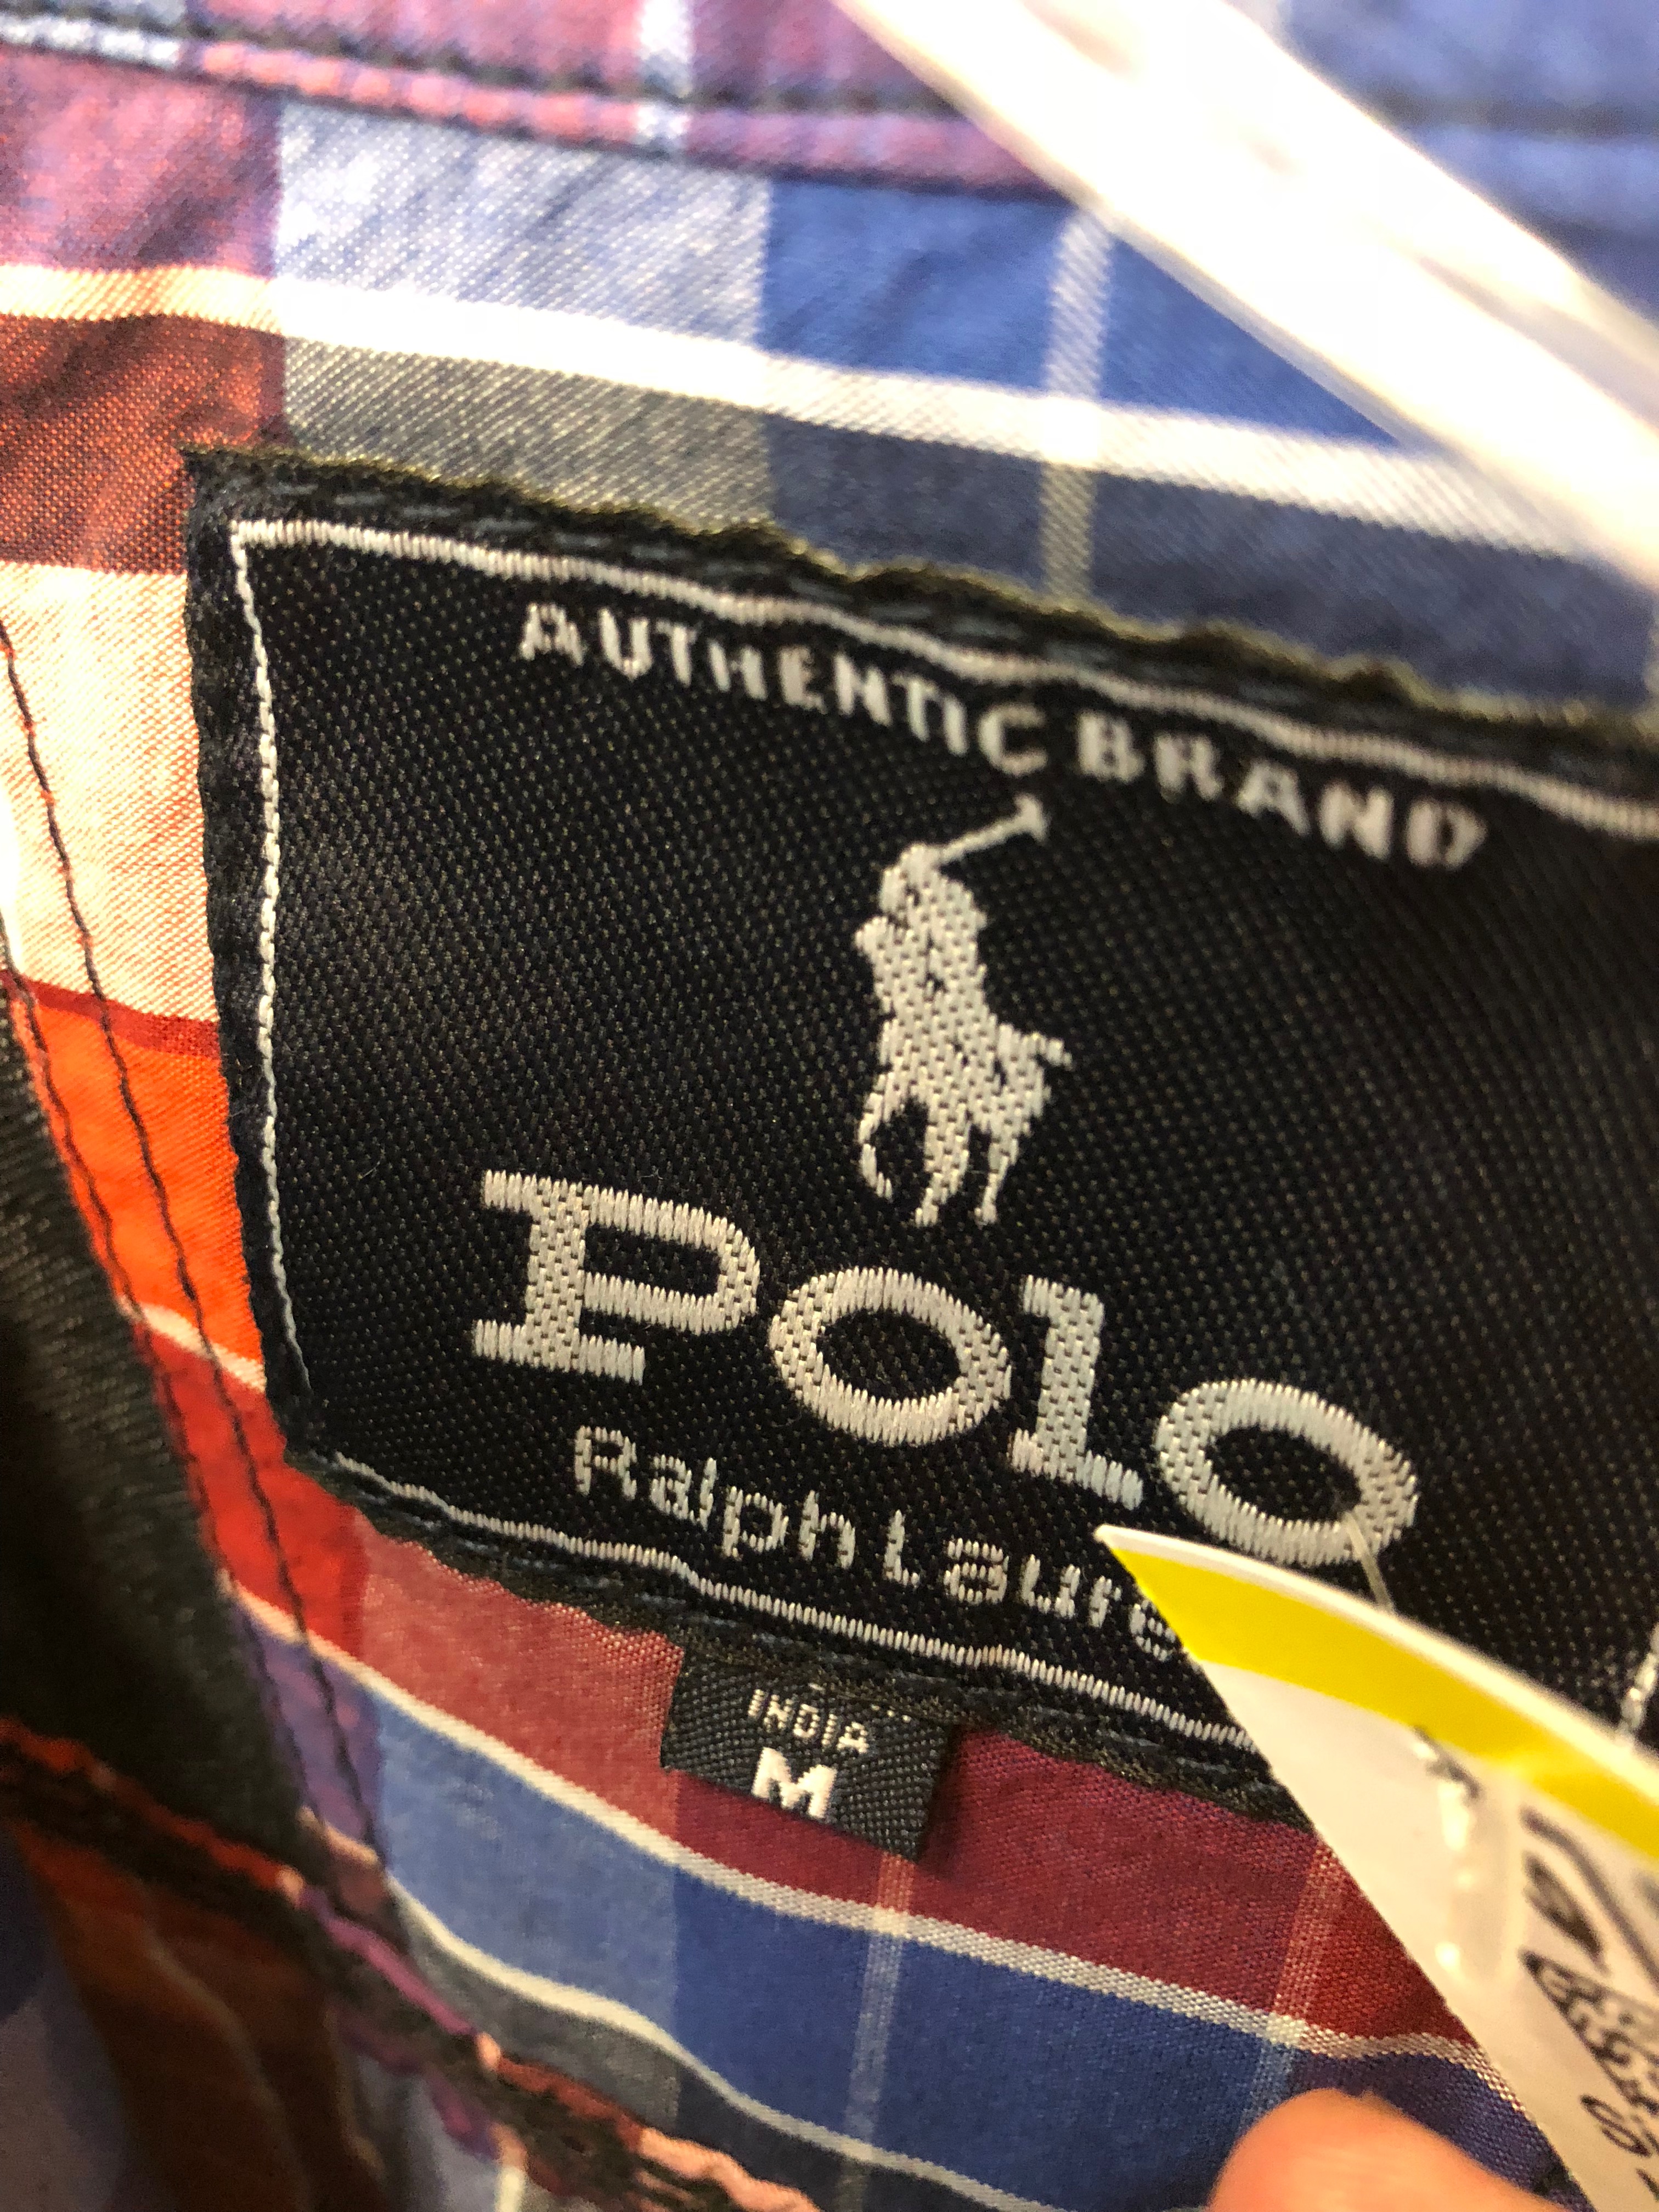 real polo ralph lauren tag